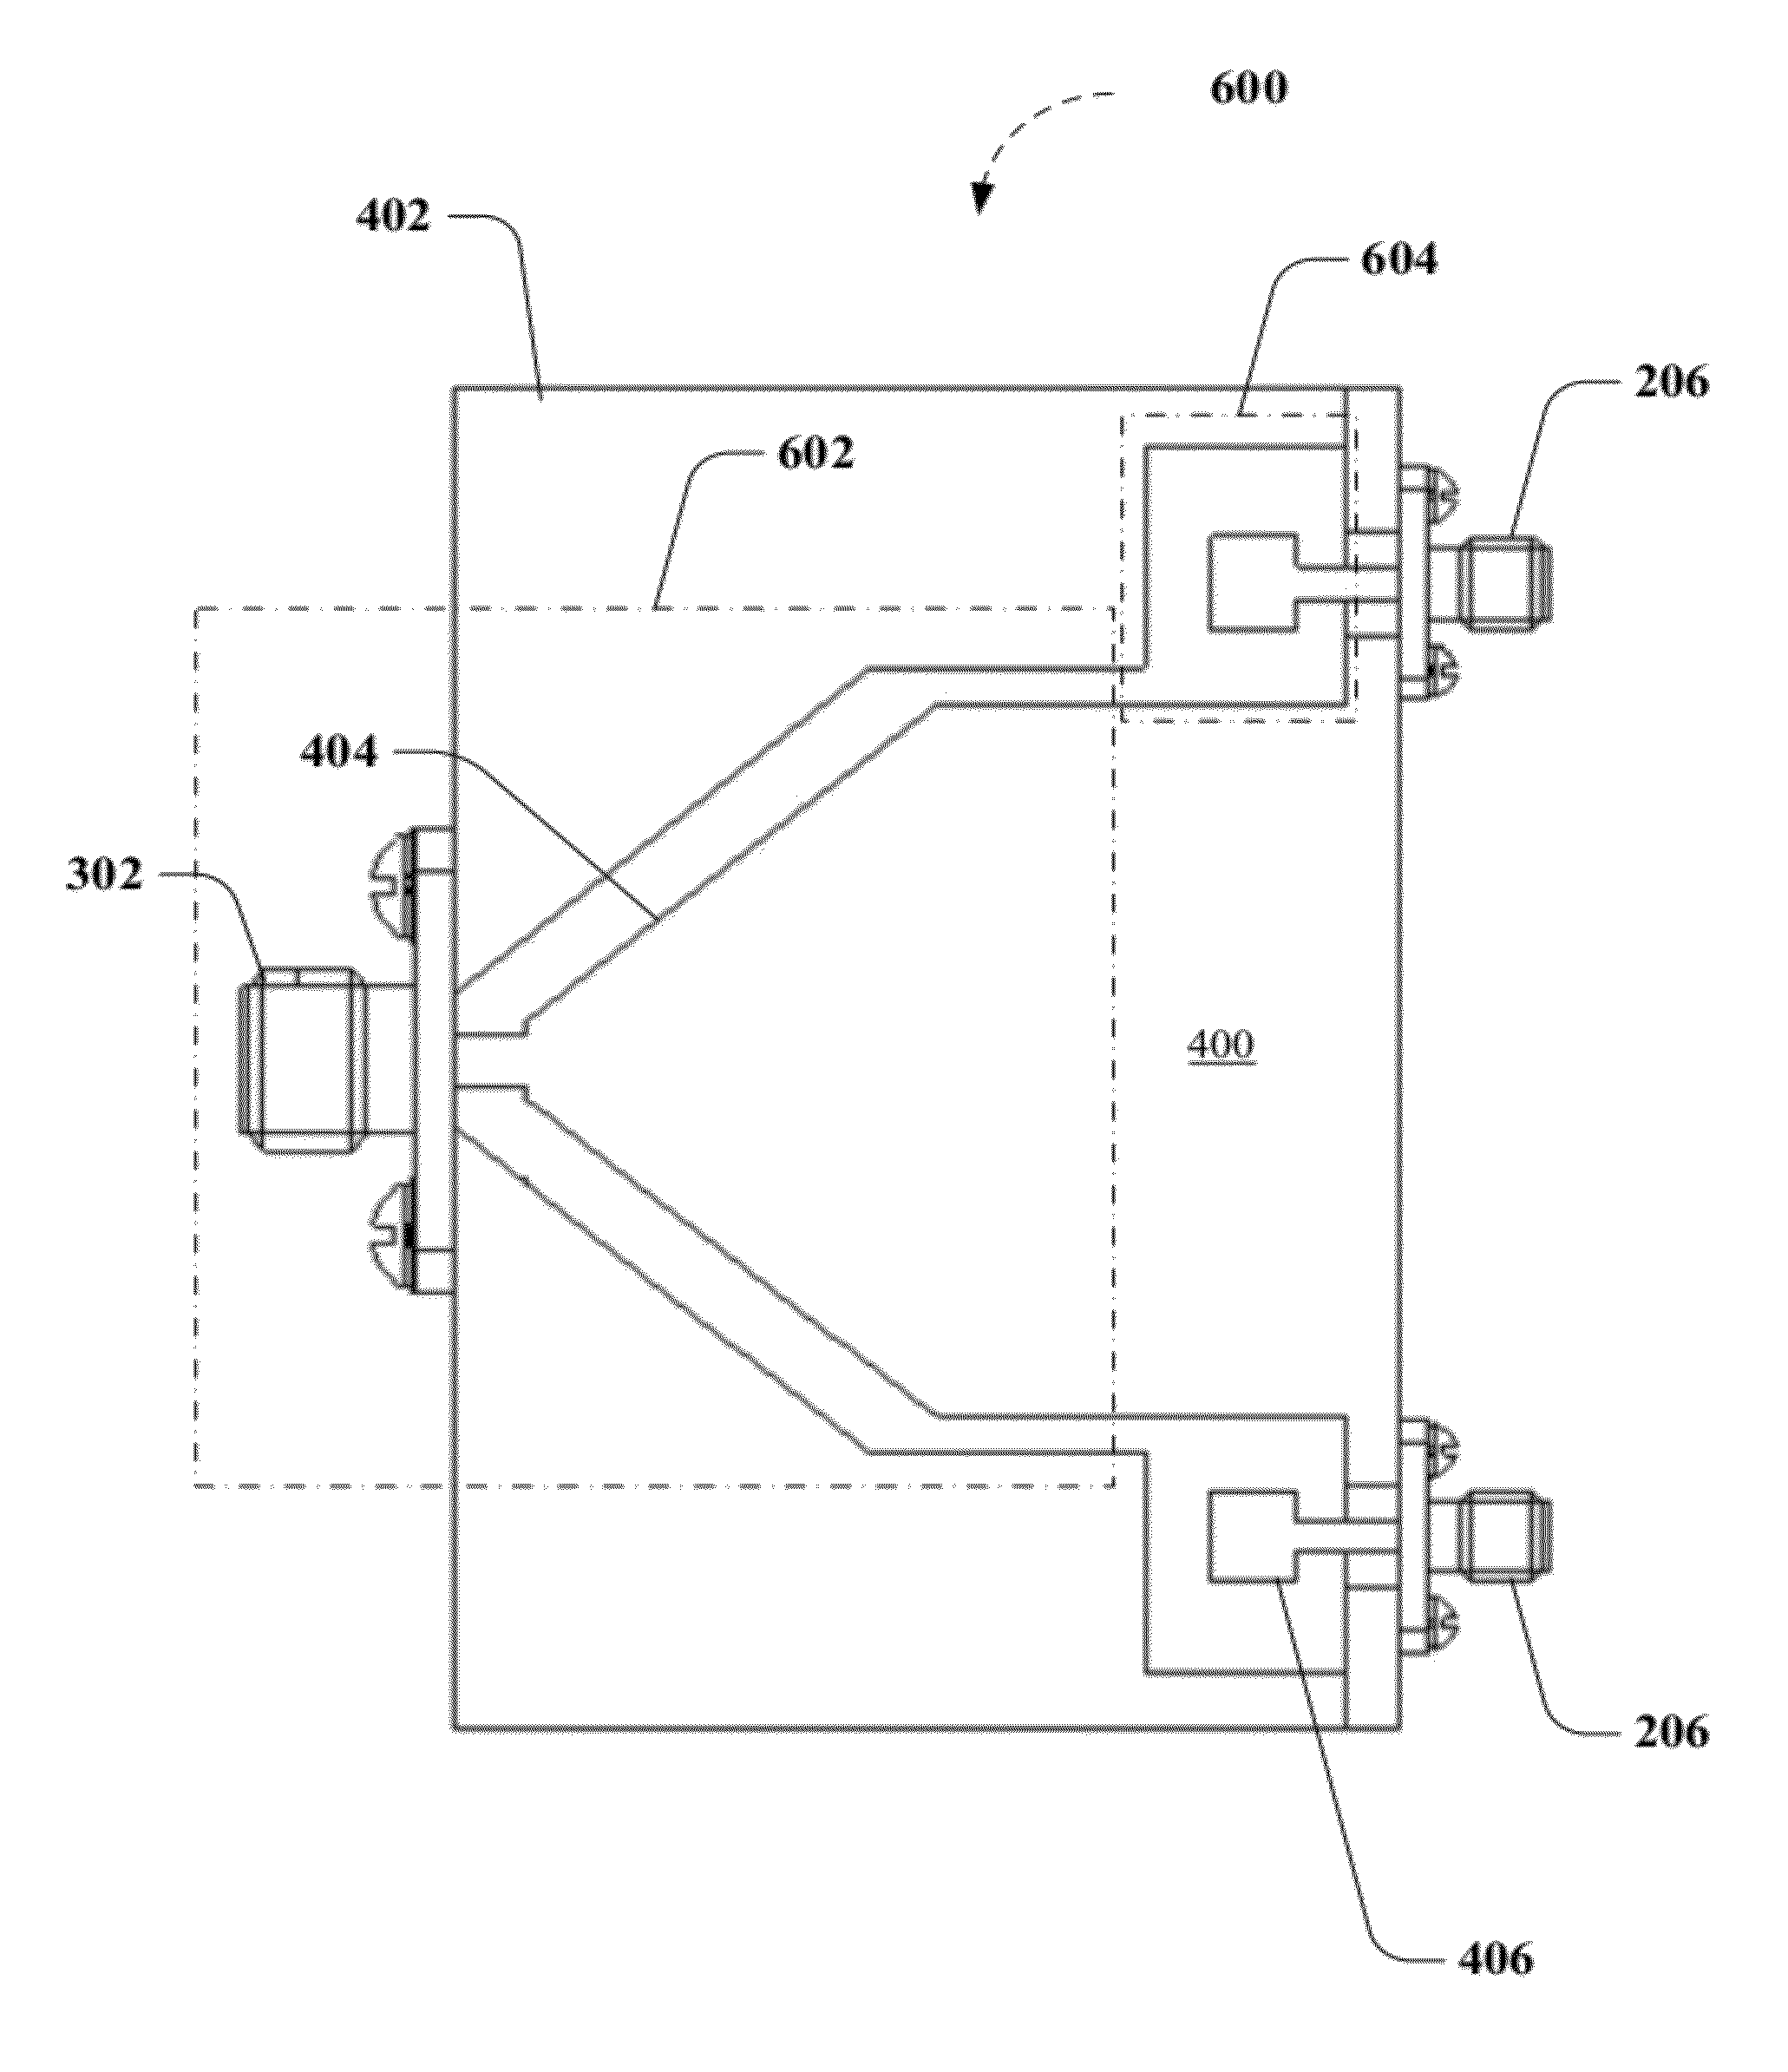 Multiple-way ring cavity power combiner and divider